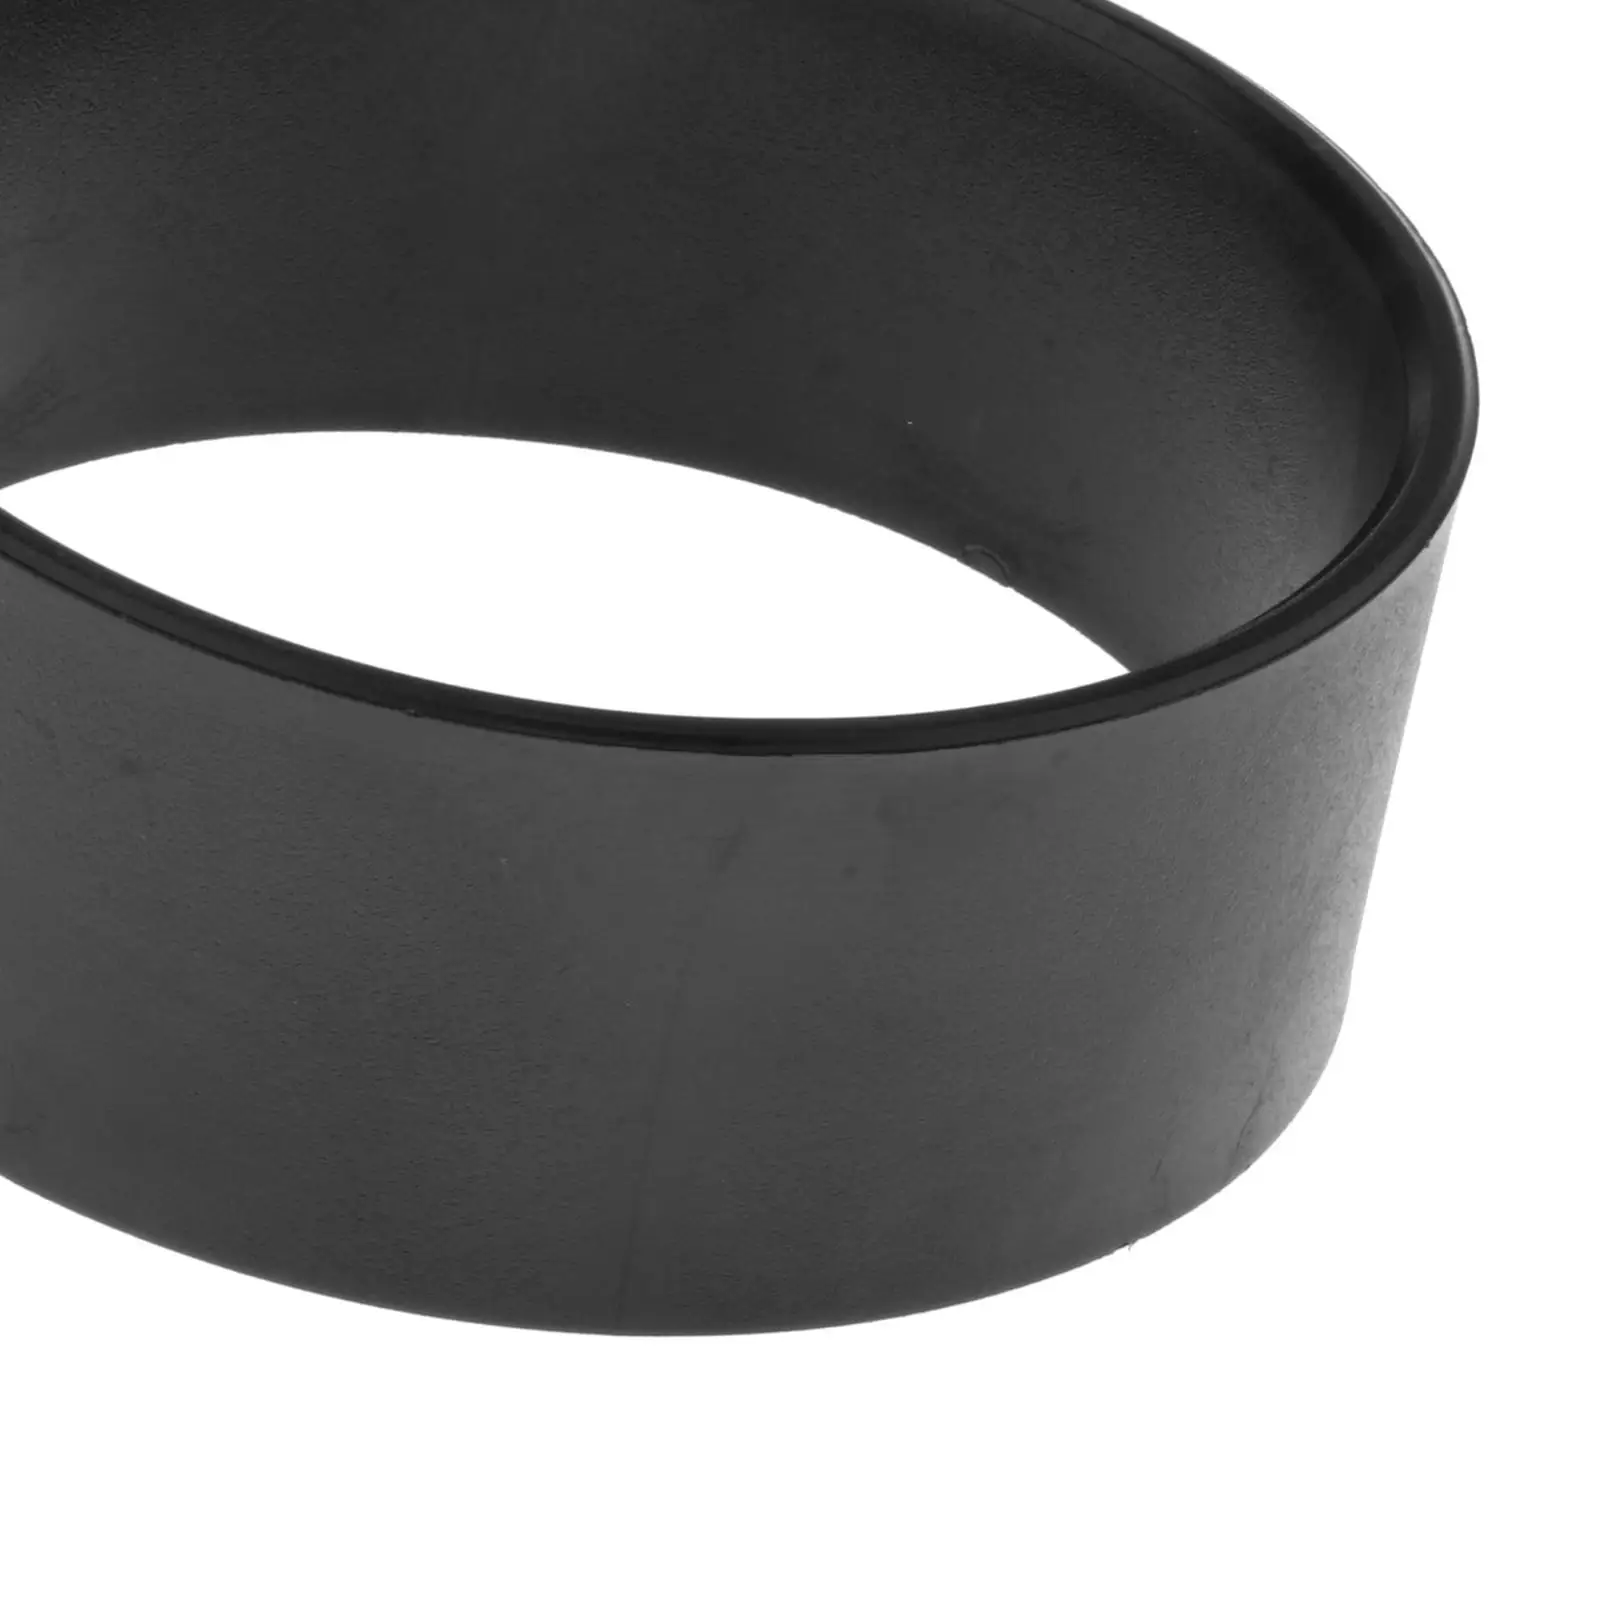 Wear Ring 155mm 271000653 271000904 Replacement for Sea Doo 947 951 XP High